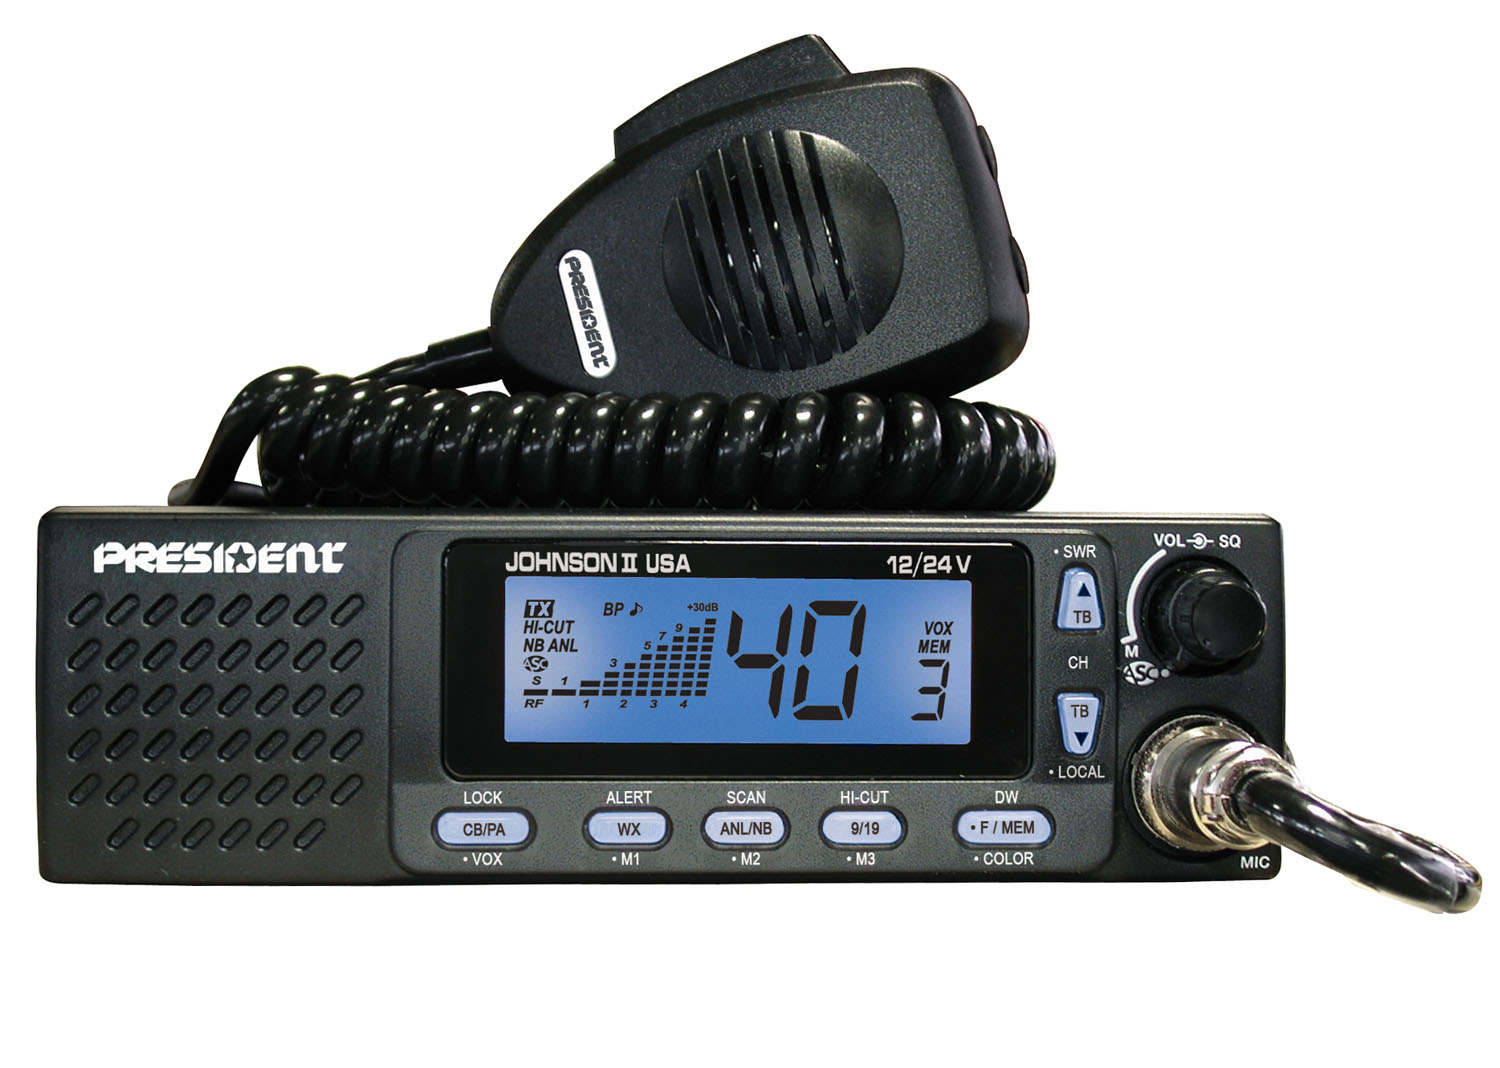 President 12-24Vdc Mobile Cb Radio With Selectable 3-Color Front Panel, Lcd Multi-Function Display, Roger Beep, Dual Watch & Tal